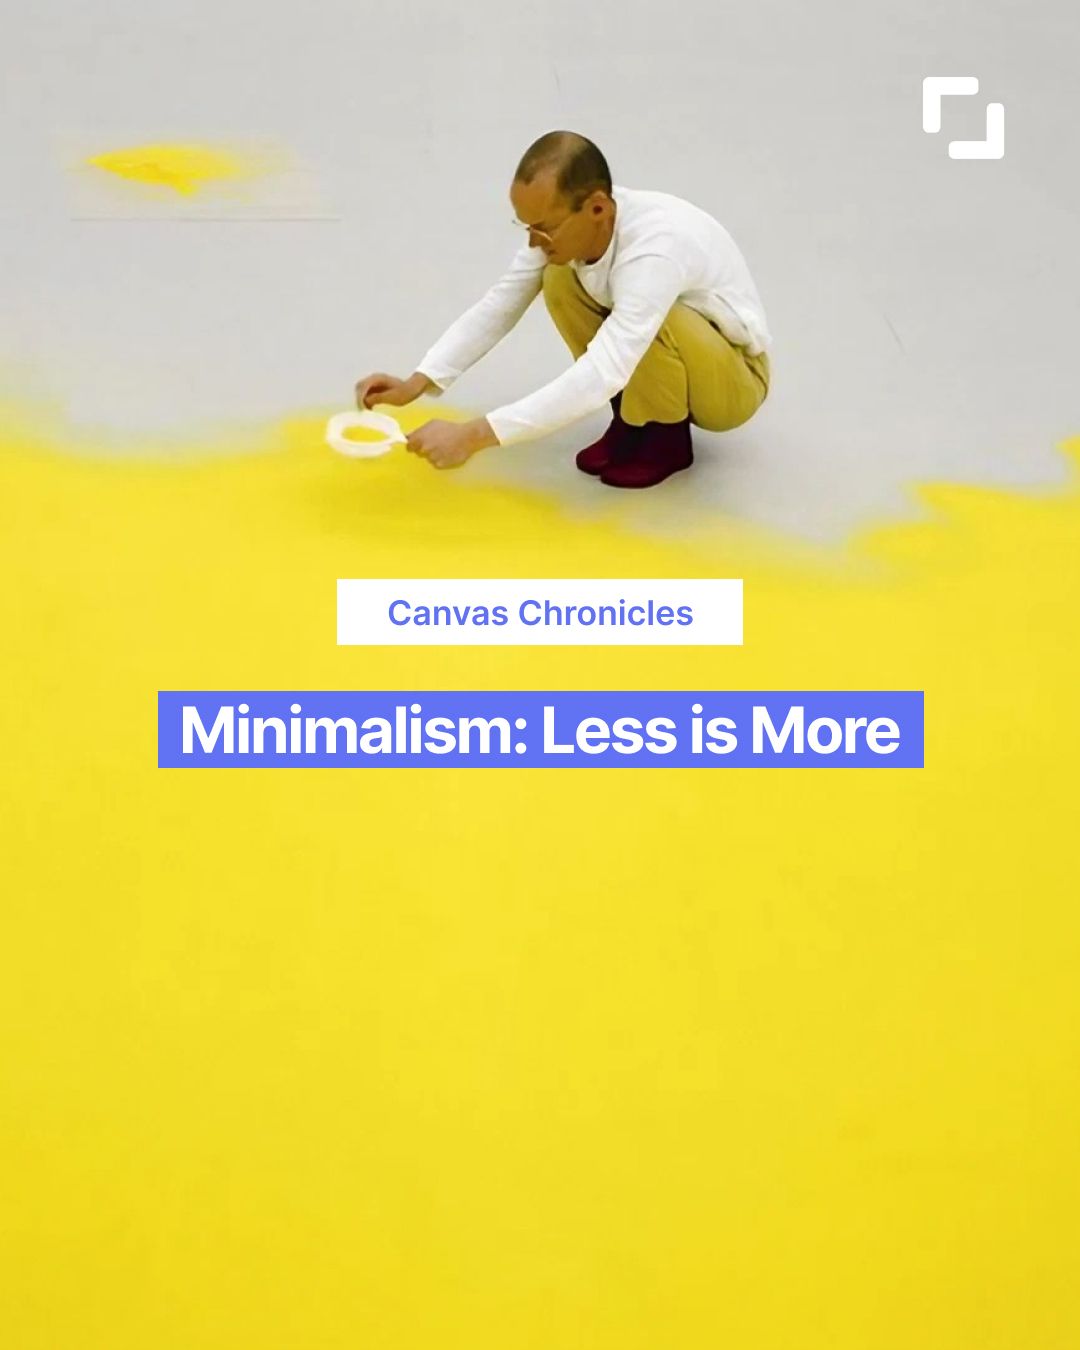 Minimalism: Less is More